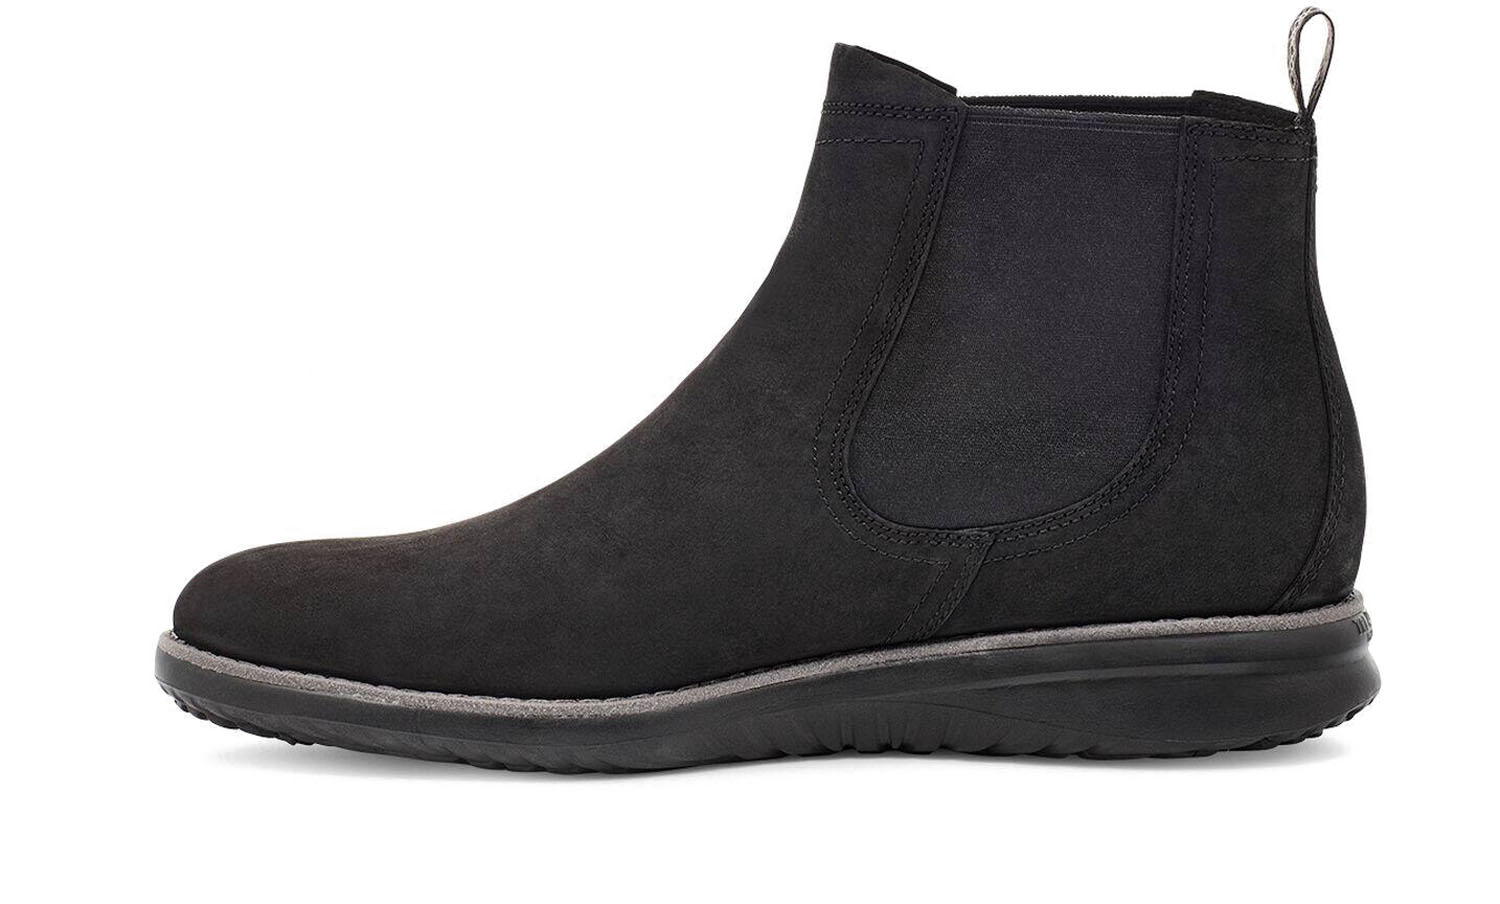 Ugg - Mens Union Chelsea Weather Boots